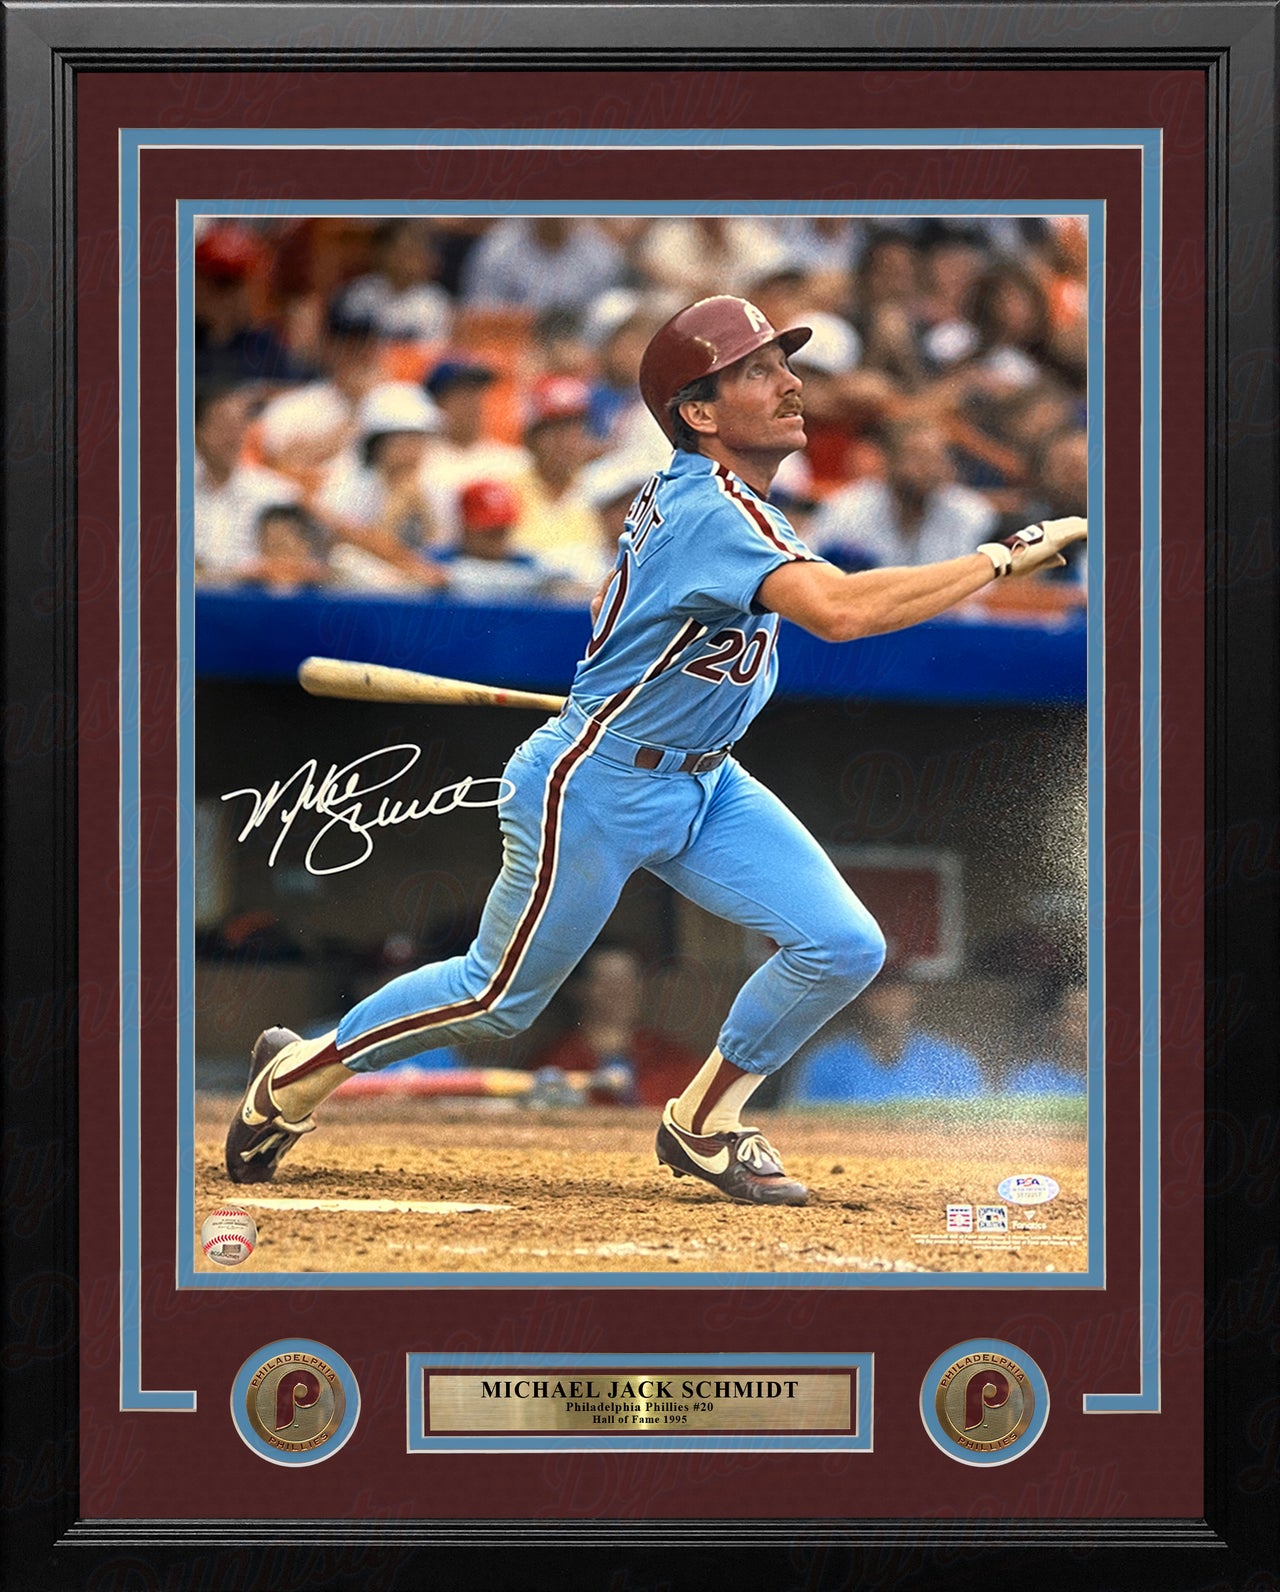 Beautiful Mike Schmidt 1980 W.S. MVP Signed Official World Series